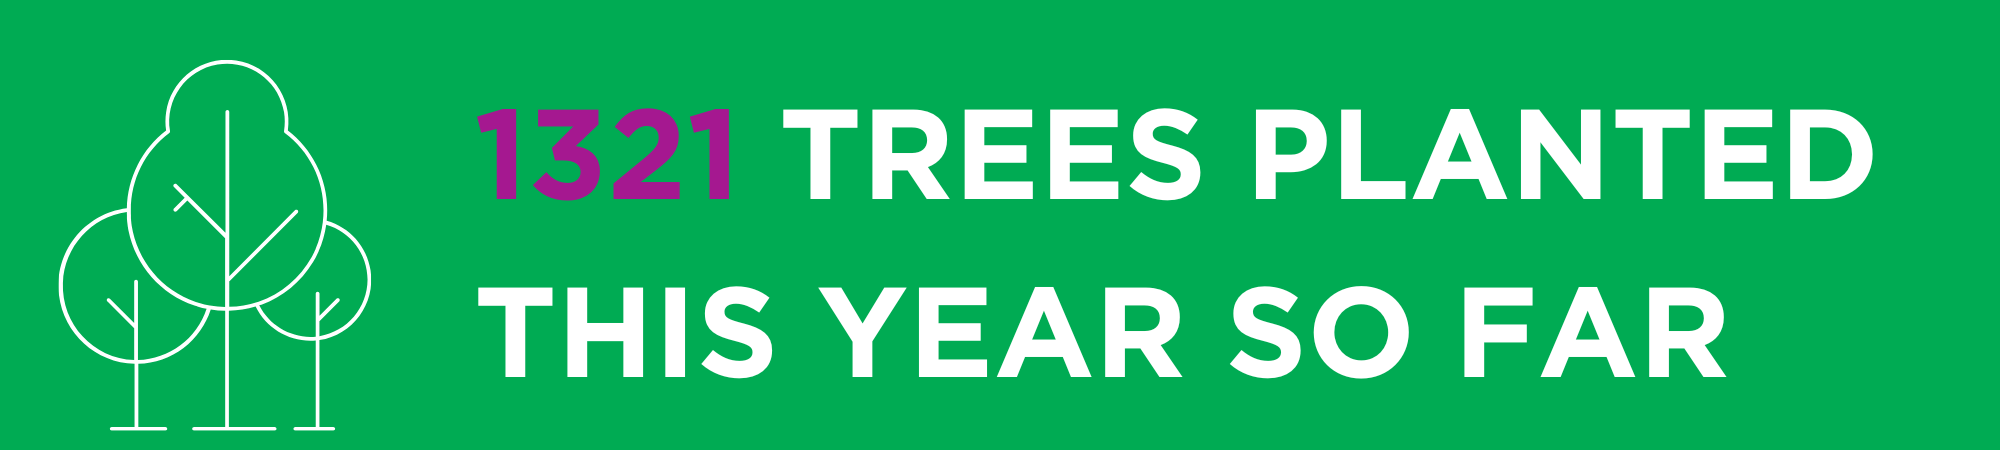 1321 Trees planted this year